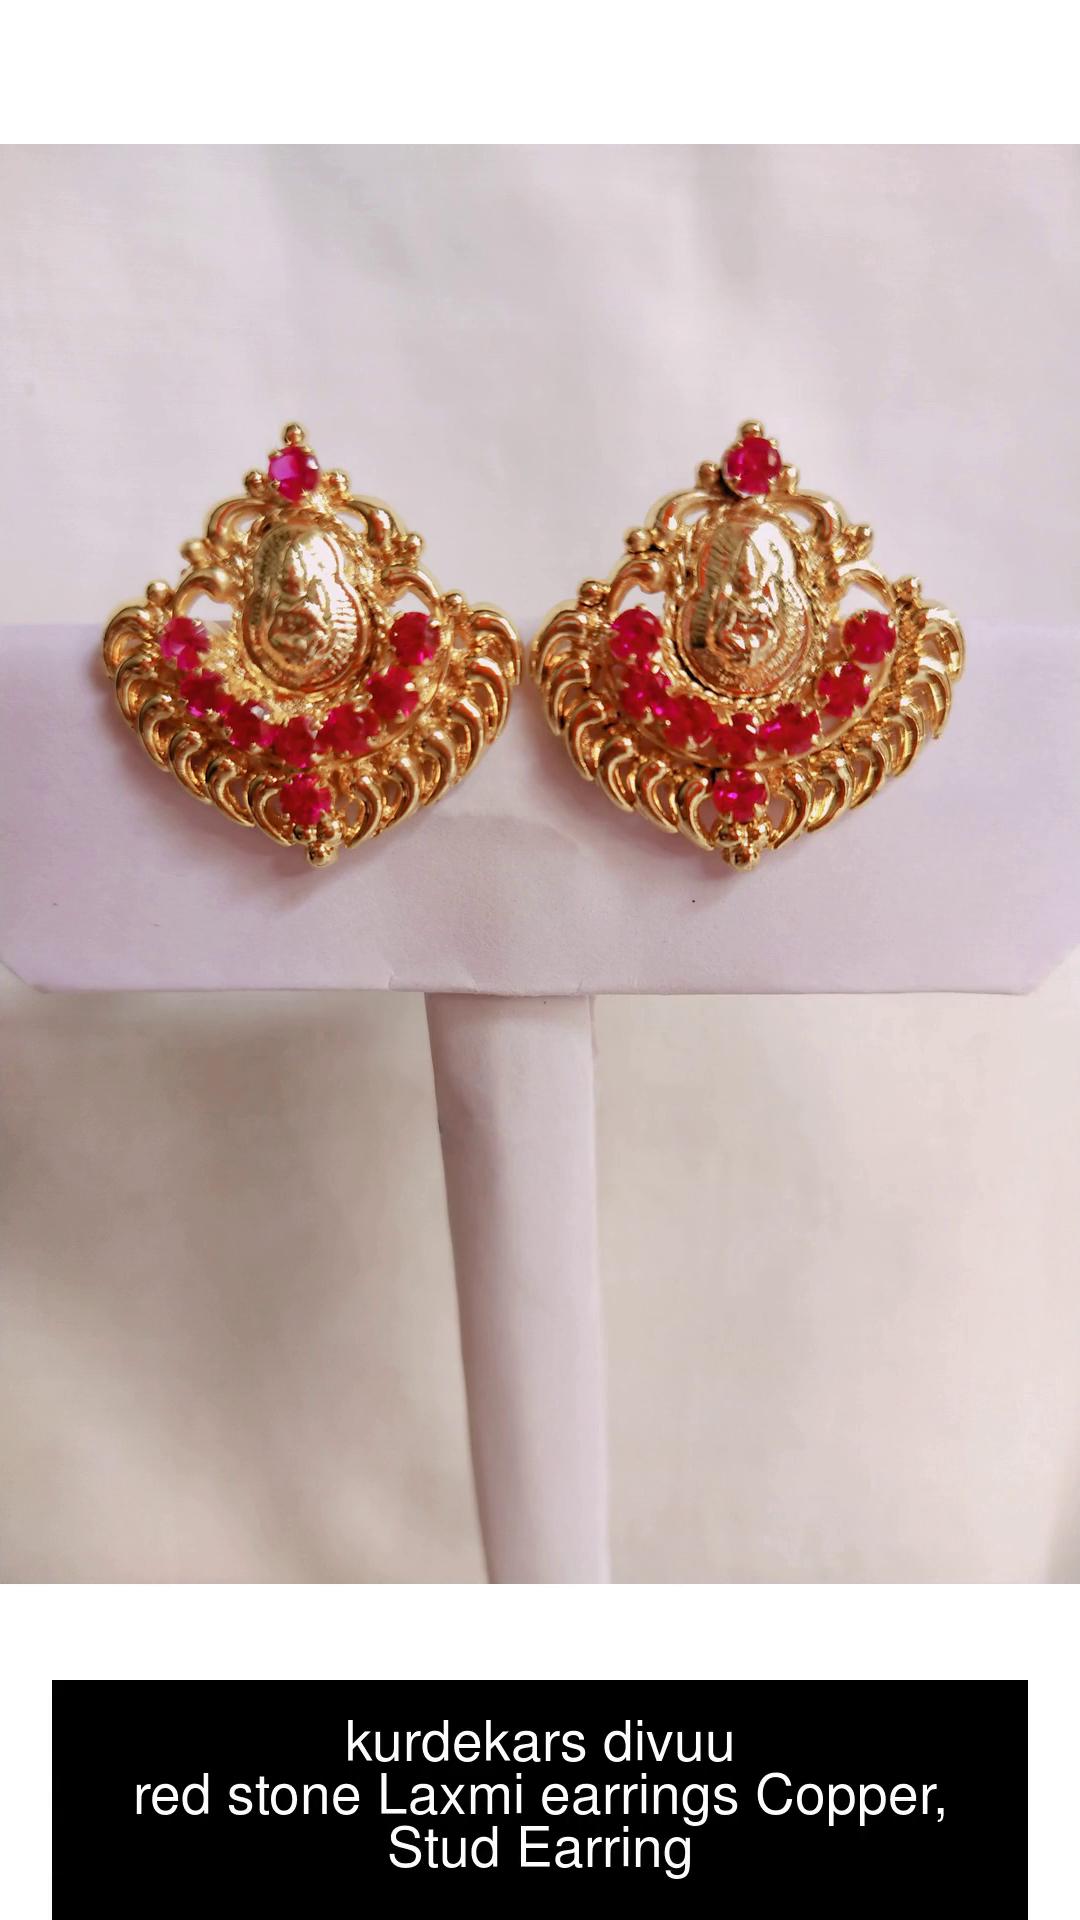 Red Earrings Online Shopping for Women at Low Prices